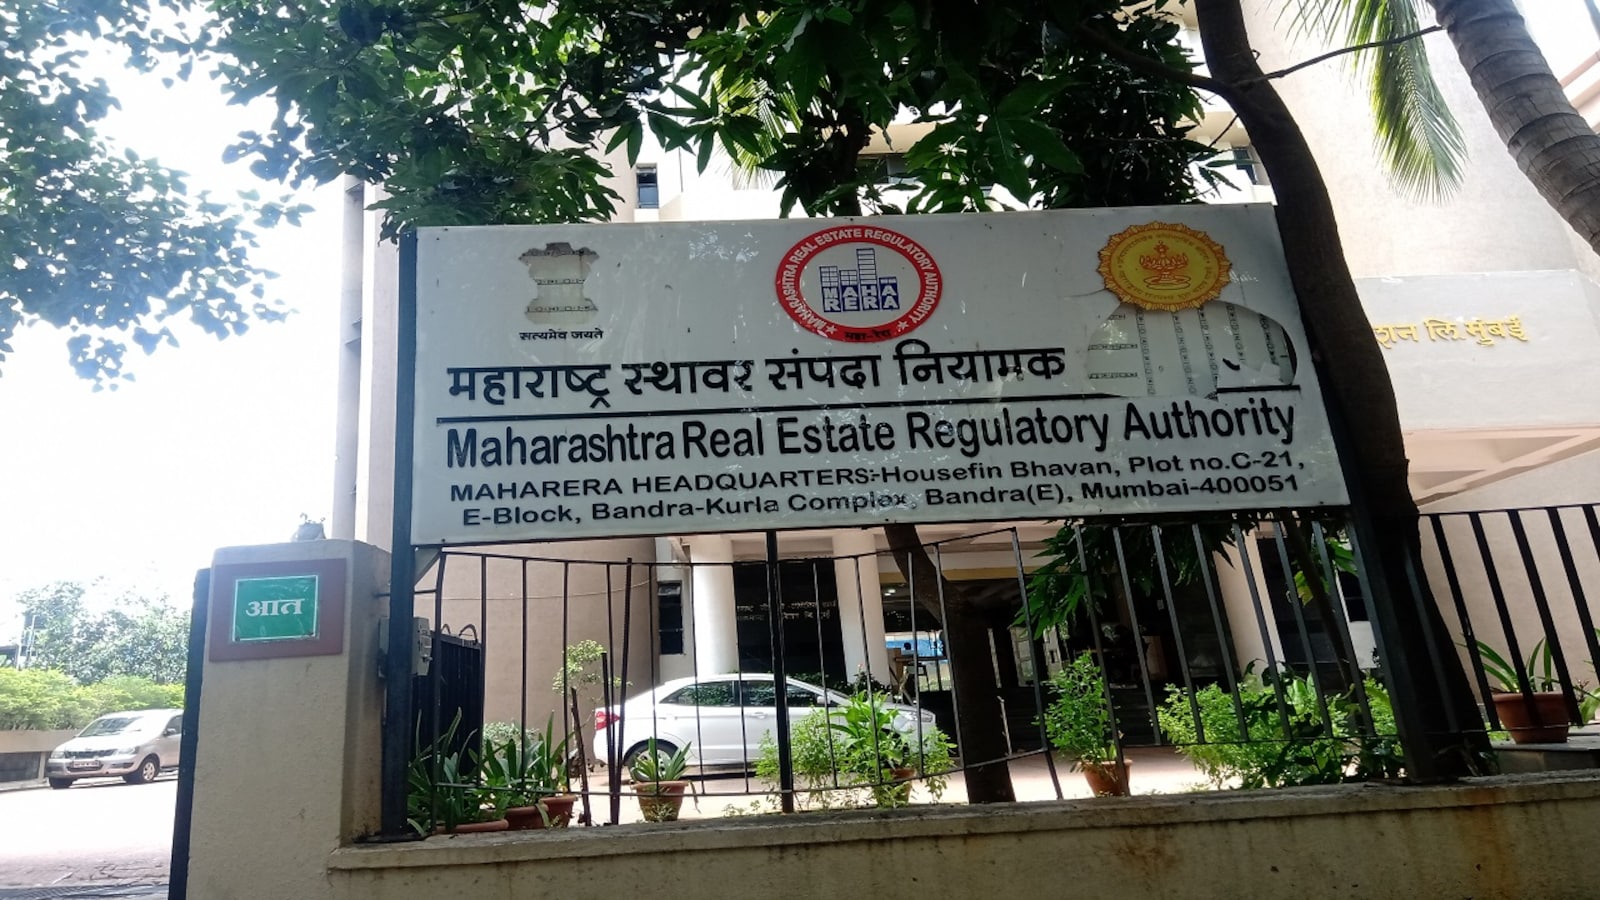 Project Advts Without MahaRERA Registration Number Will Face Action